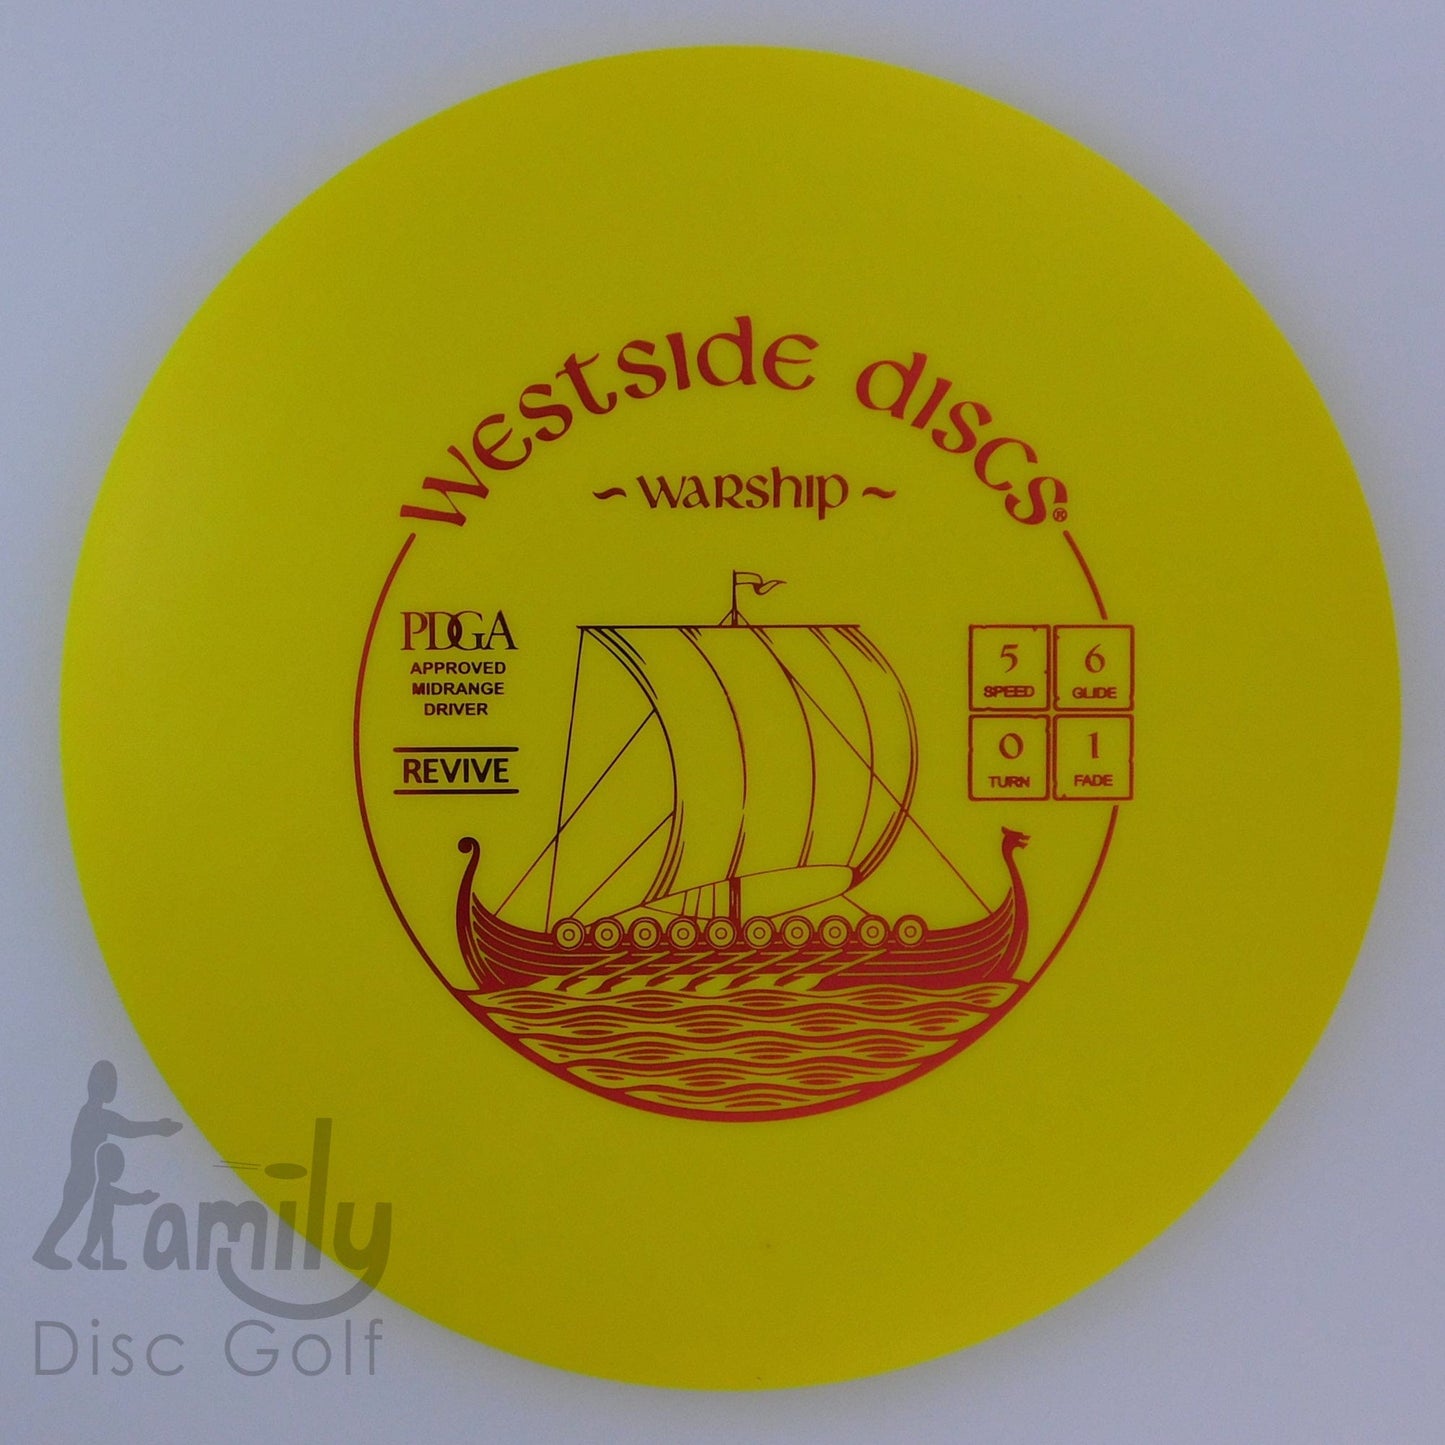 Westside Discs Warship - Revive 5│6│0│1 179.6g - Yellow - Westside Discs Warship - Revive - 101383